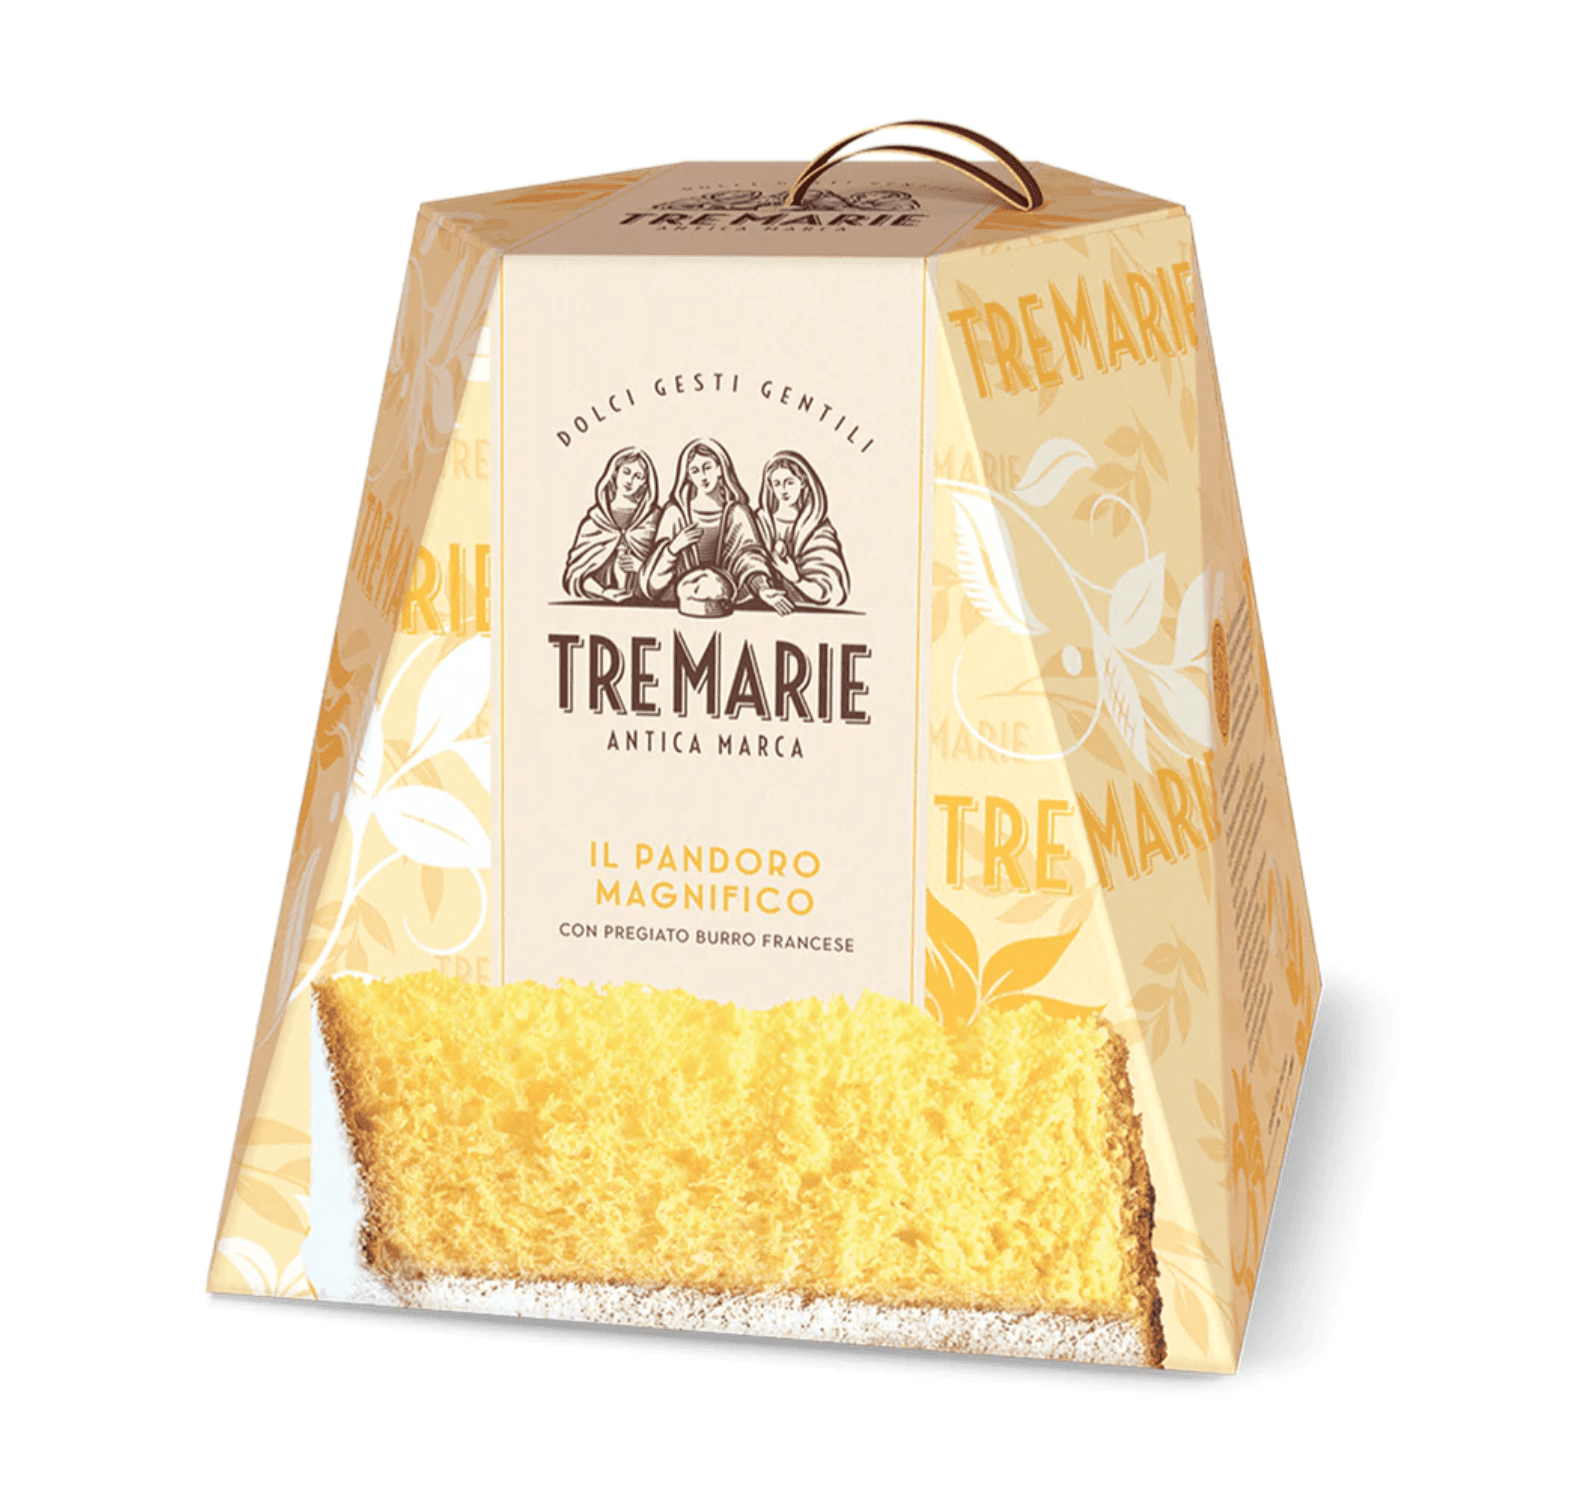  Tre Marie Il Panettone Milanese 750 g (1 lb 10.5 oz)  Traditional Italian Christmas Cake : Grocery & Gourmet Food